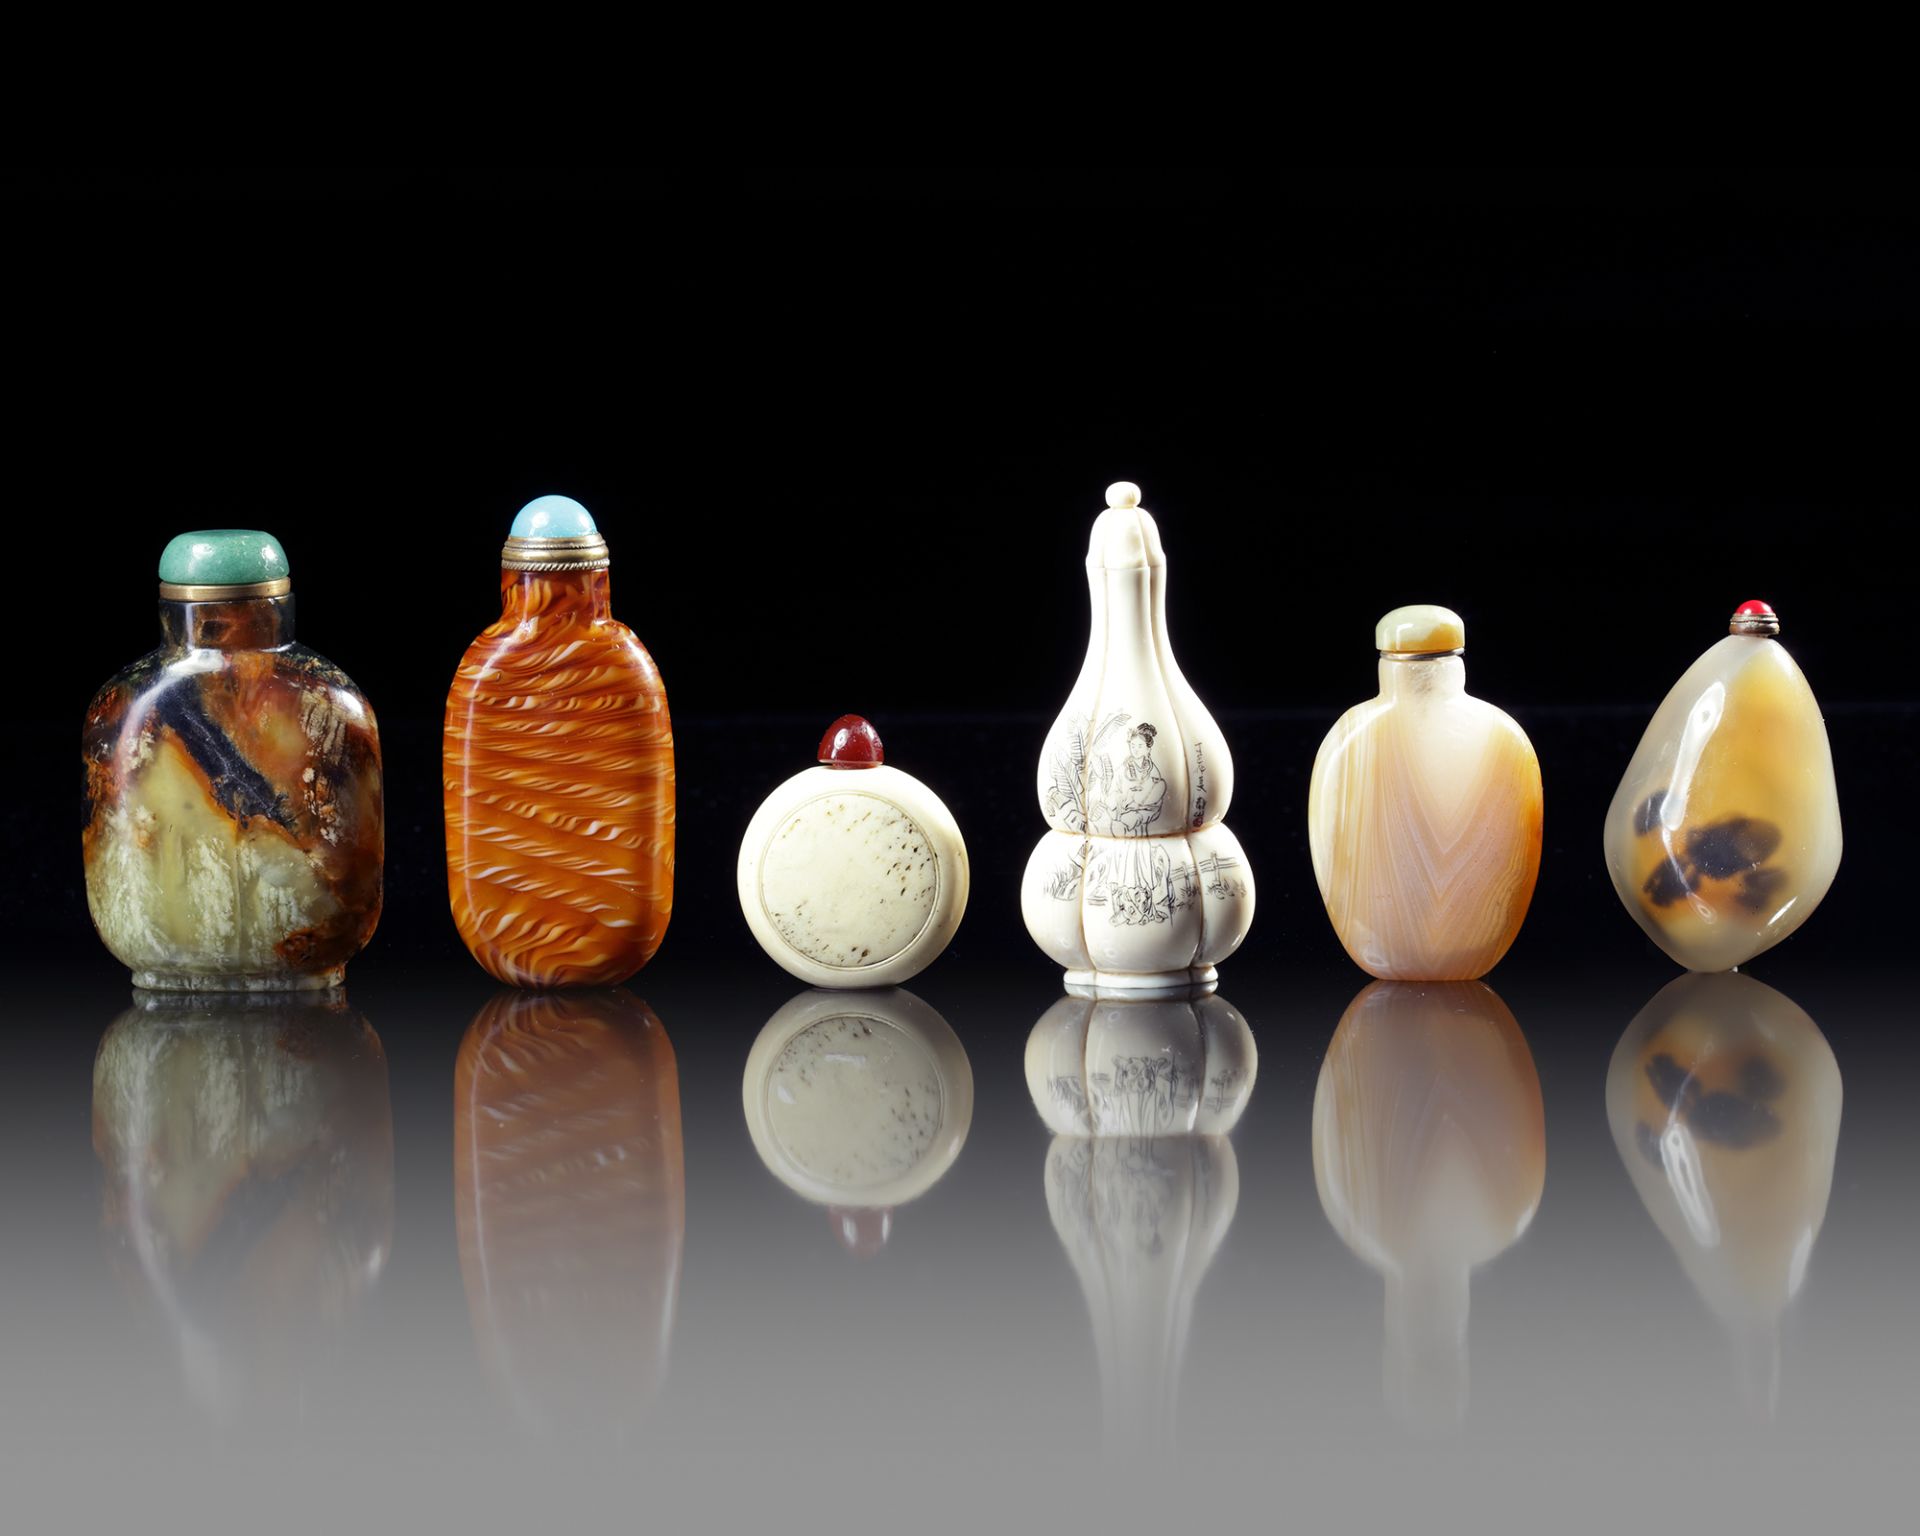 SIX CHINESE SNUFF BOTTLES, 19TH-20TH CENTURY - Image 2 of 3